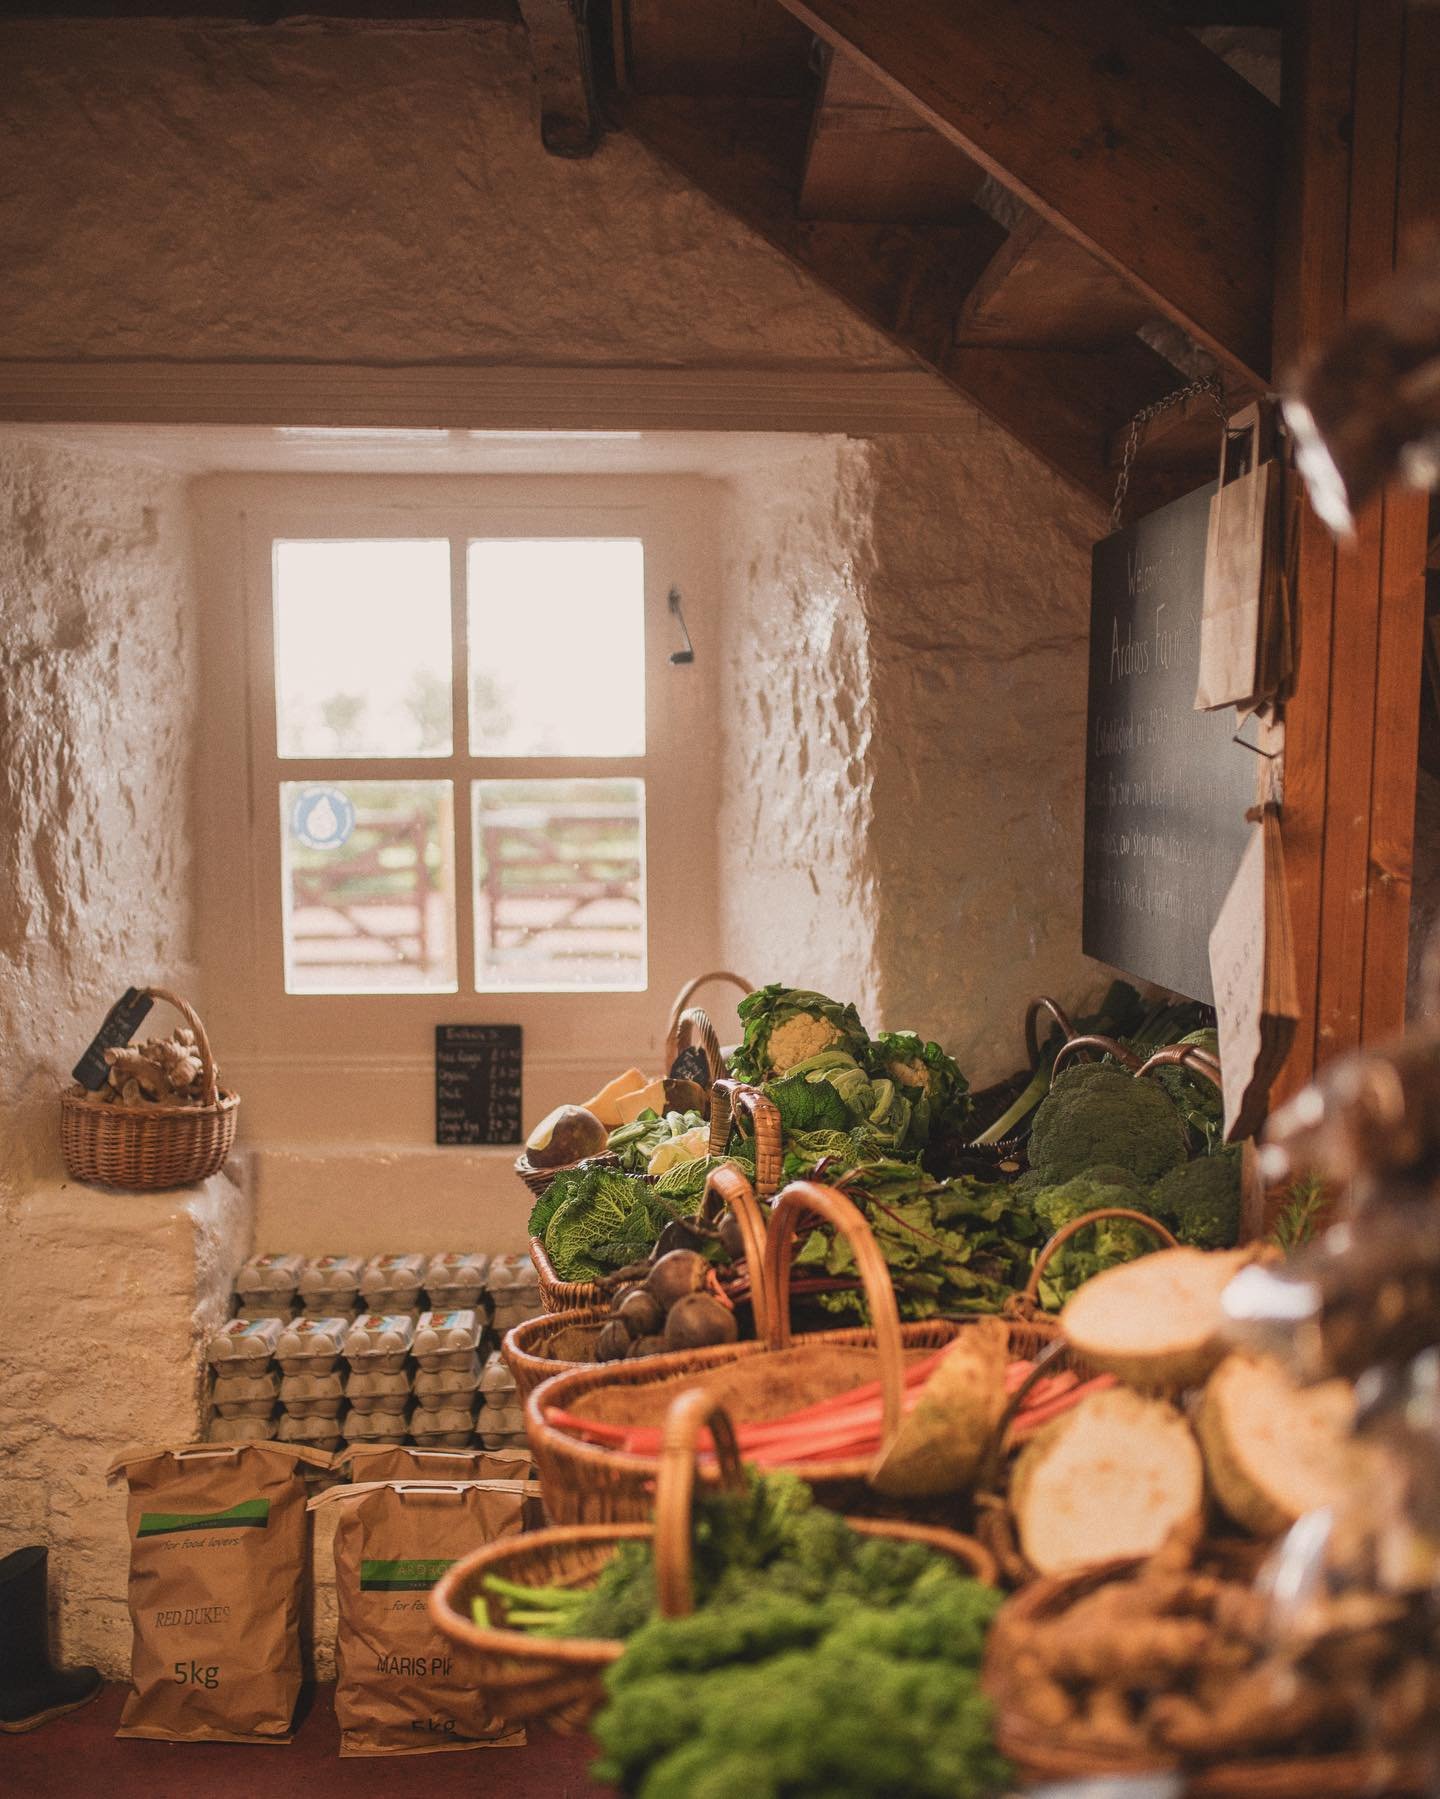 The East Neuk&rsquo;s local farm shop @ardrossfarm.
Great local fruit and vegetables, Balcarres beef and lamb, artisanal breads and much more. 

#Ardross #FarmShop #BuyLocal #Organic #FarmToTable #Farming